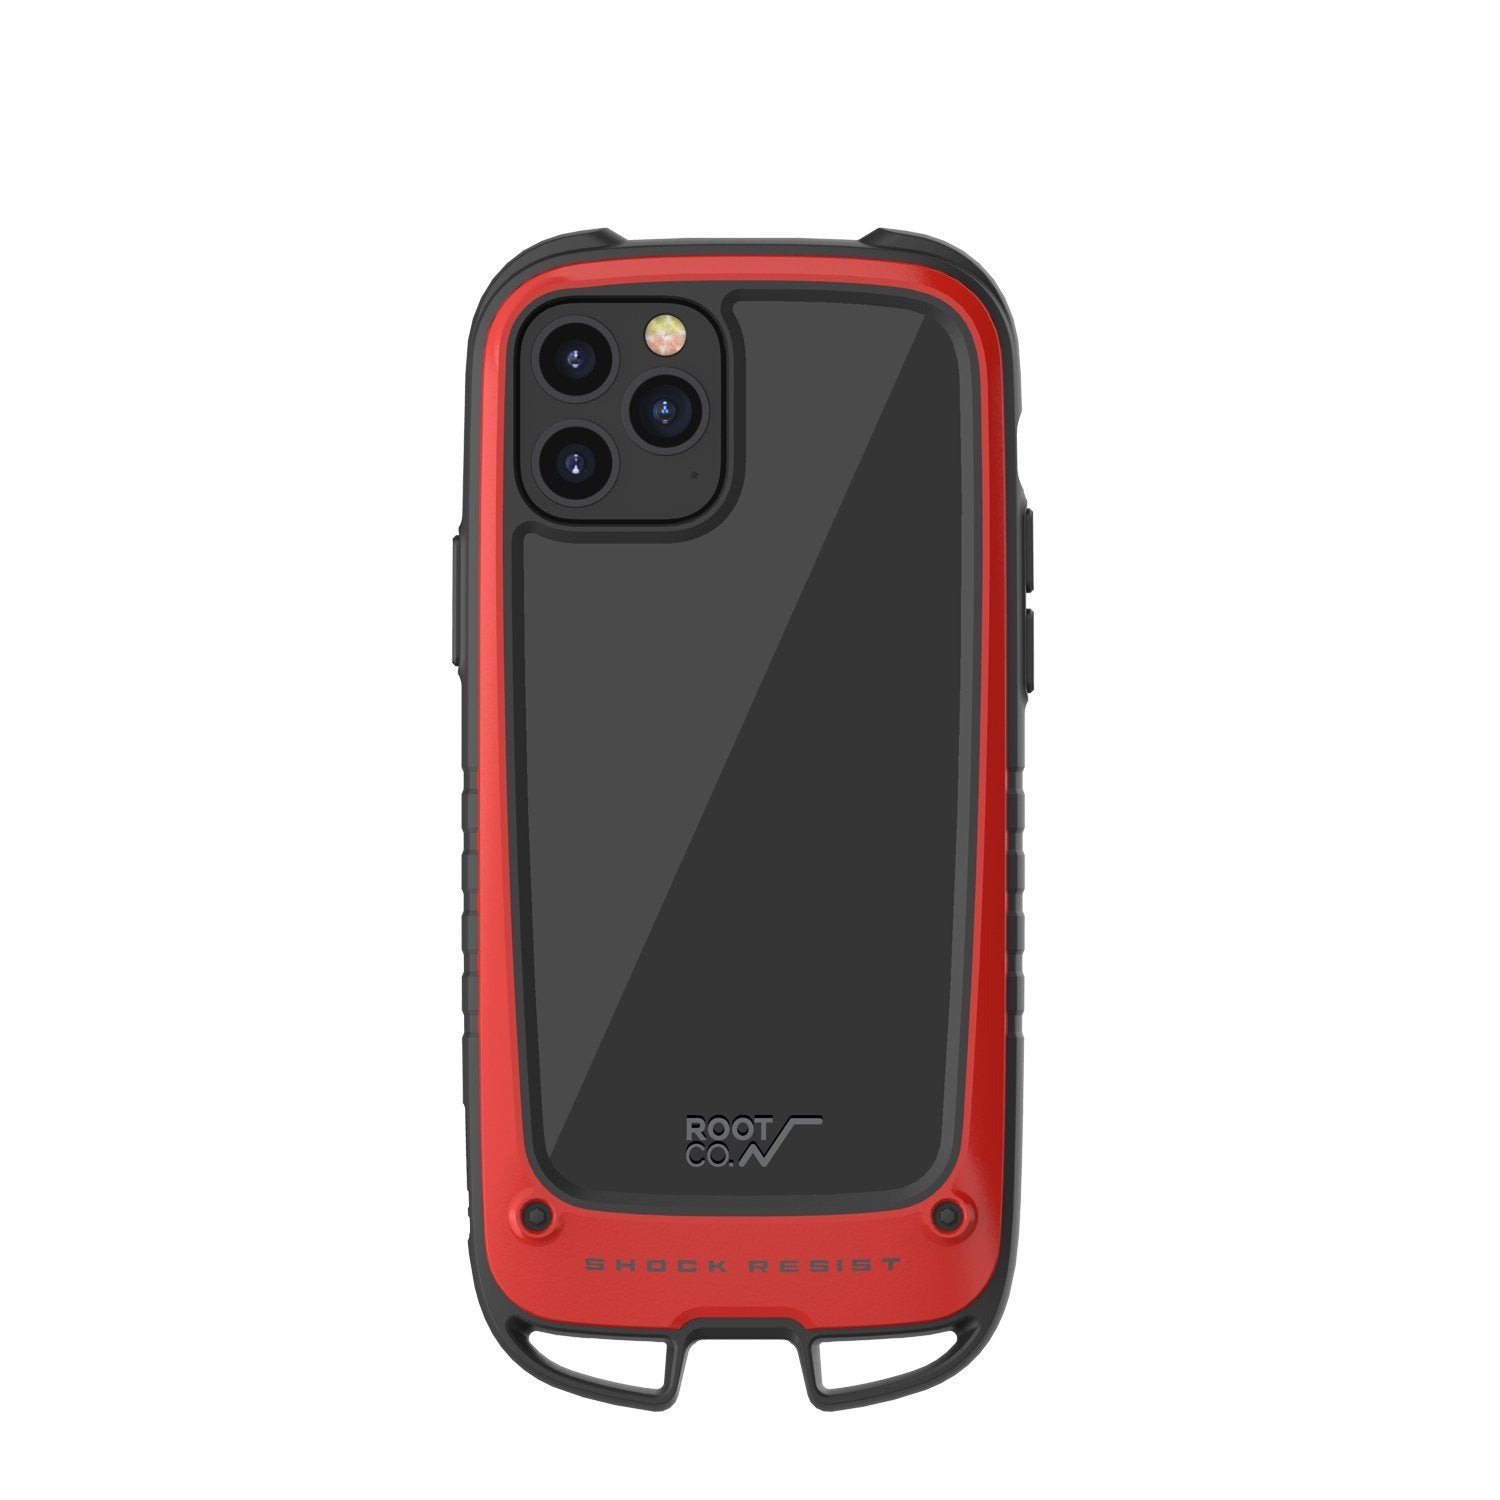 ROOT CO. Gravity Shock Resist Case + Hold for iPhone 12/12 Pro 6.1"(2020), Red Default ROOT CO. 